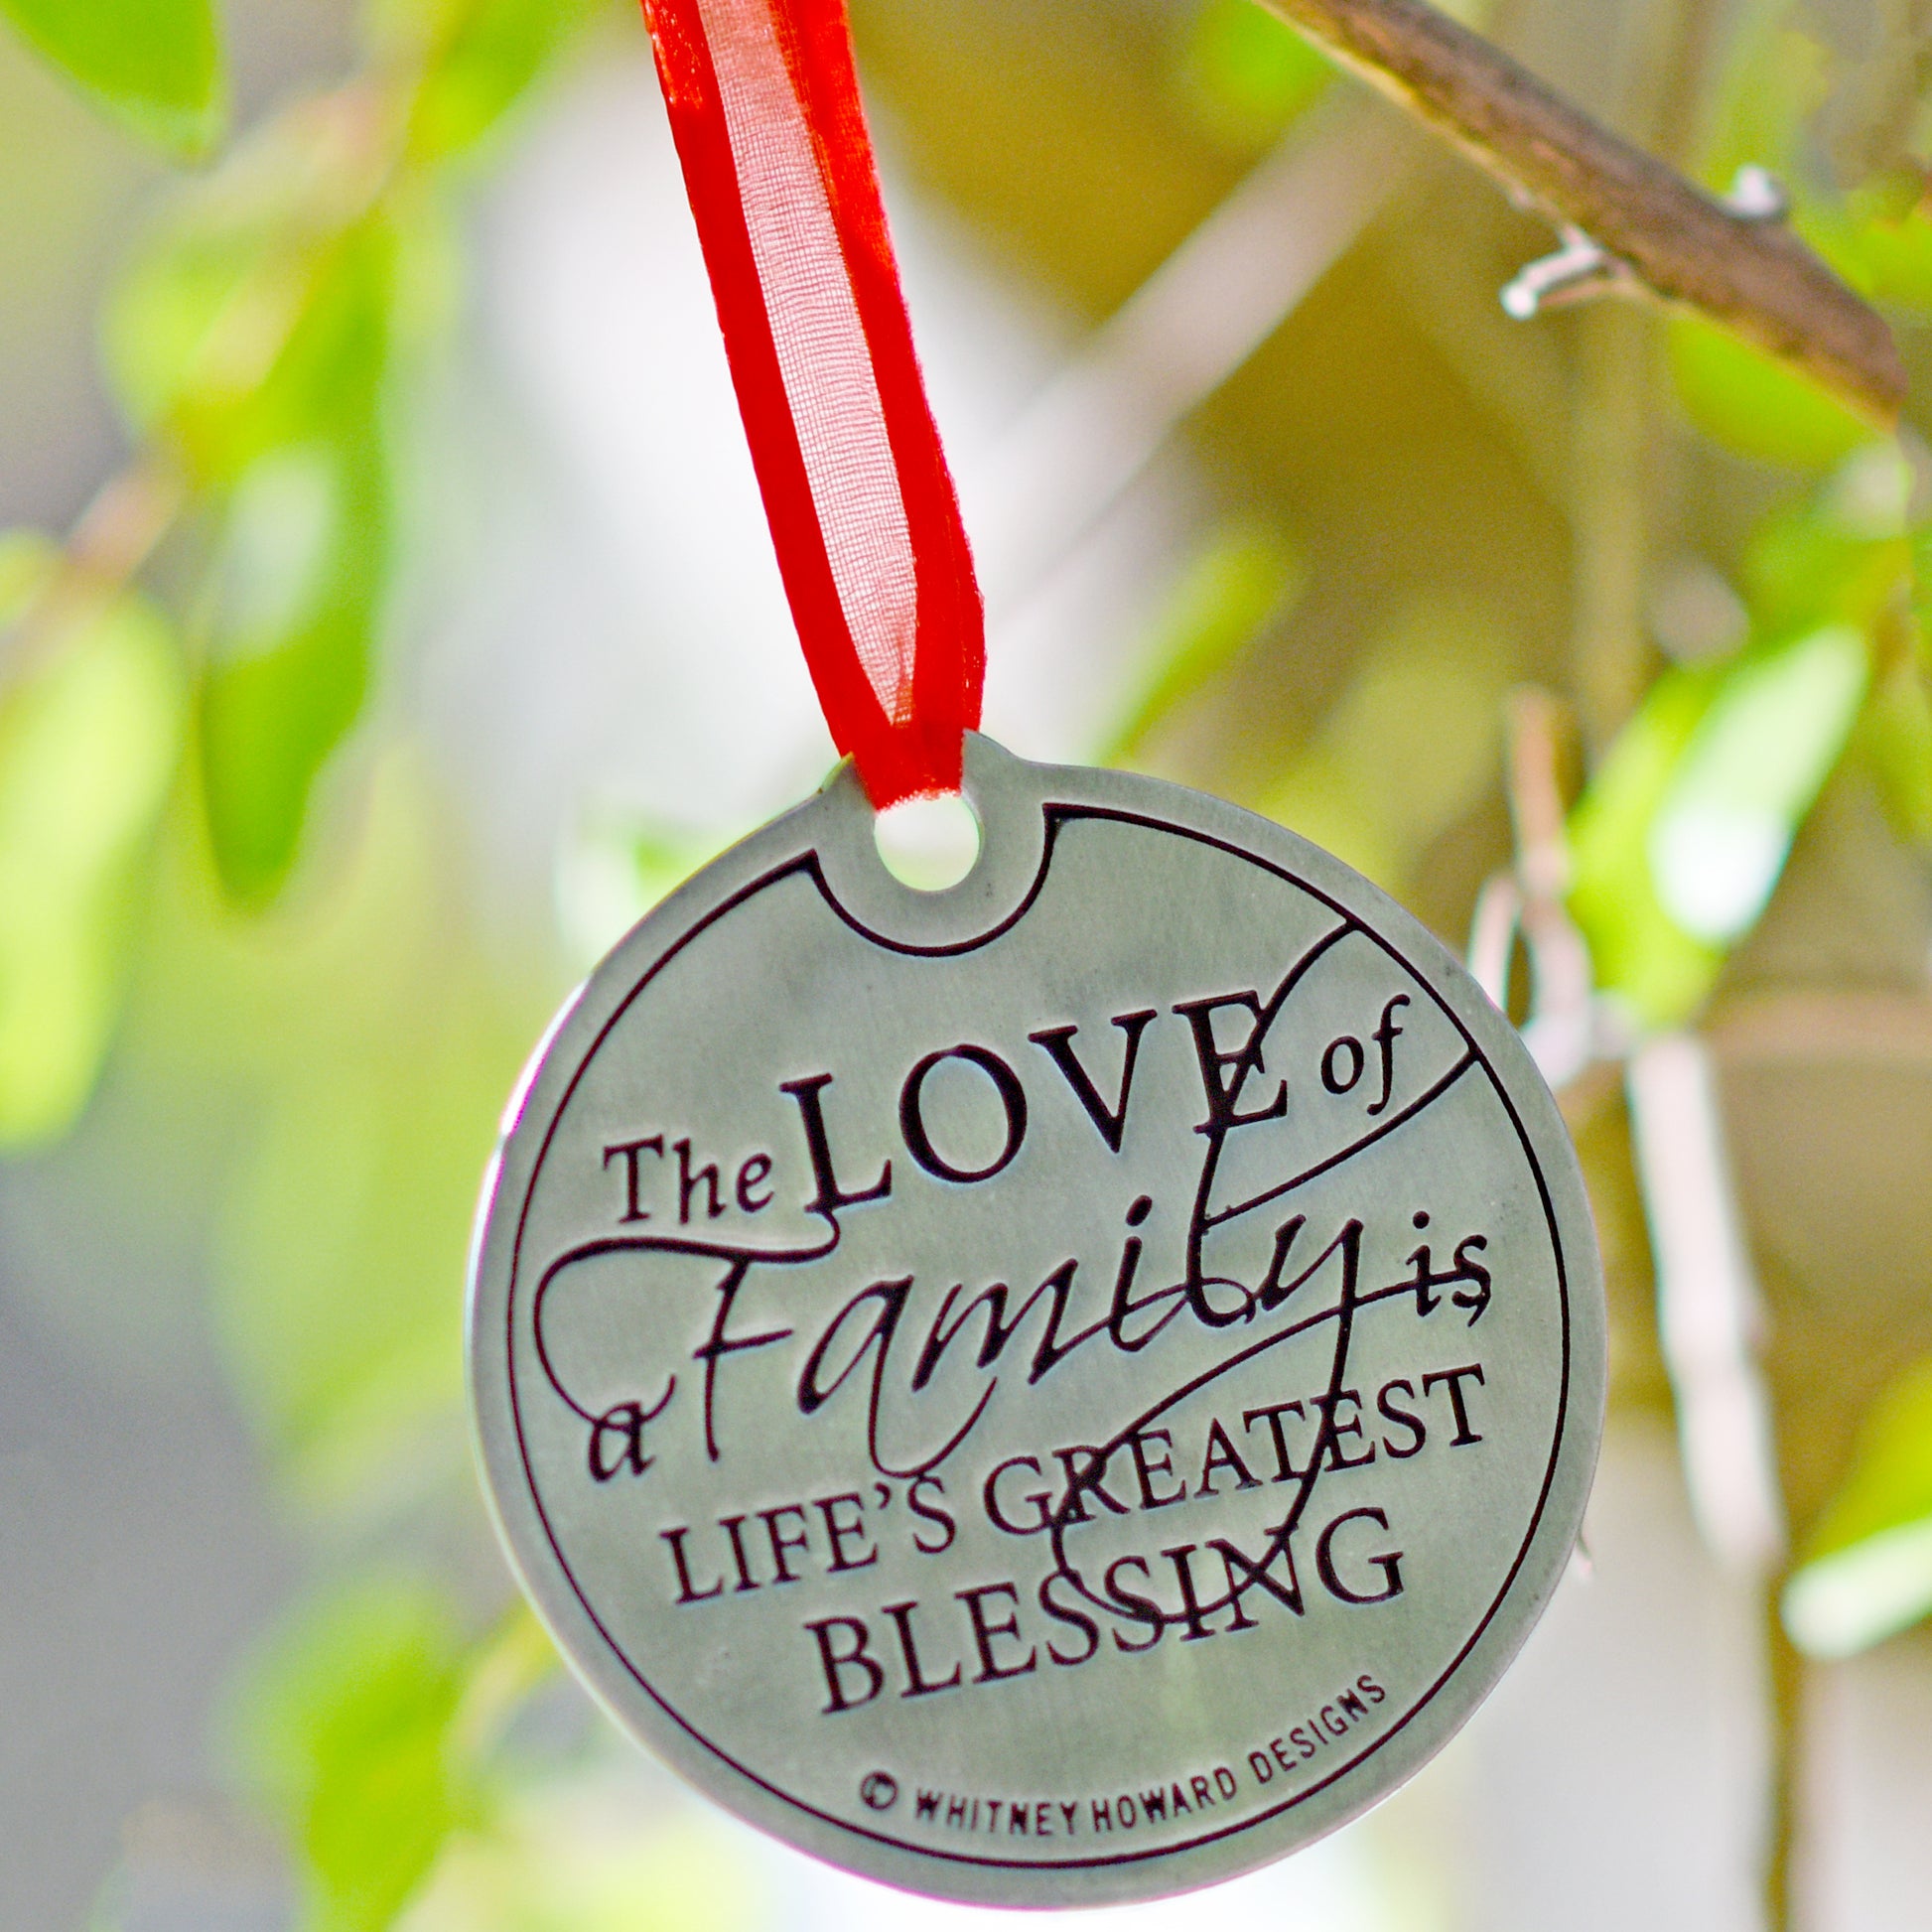 The Love of a Family is Life's Greatest Blessing Holiday Ornament hanging closeup